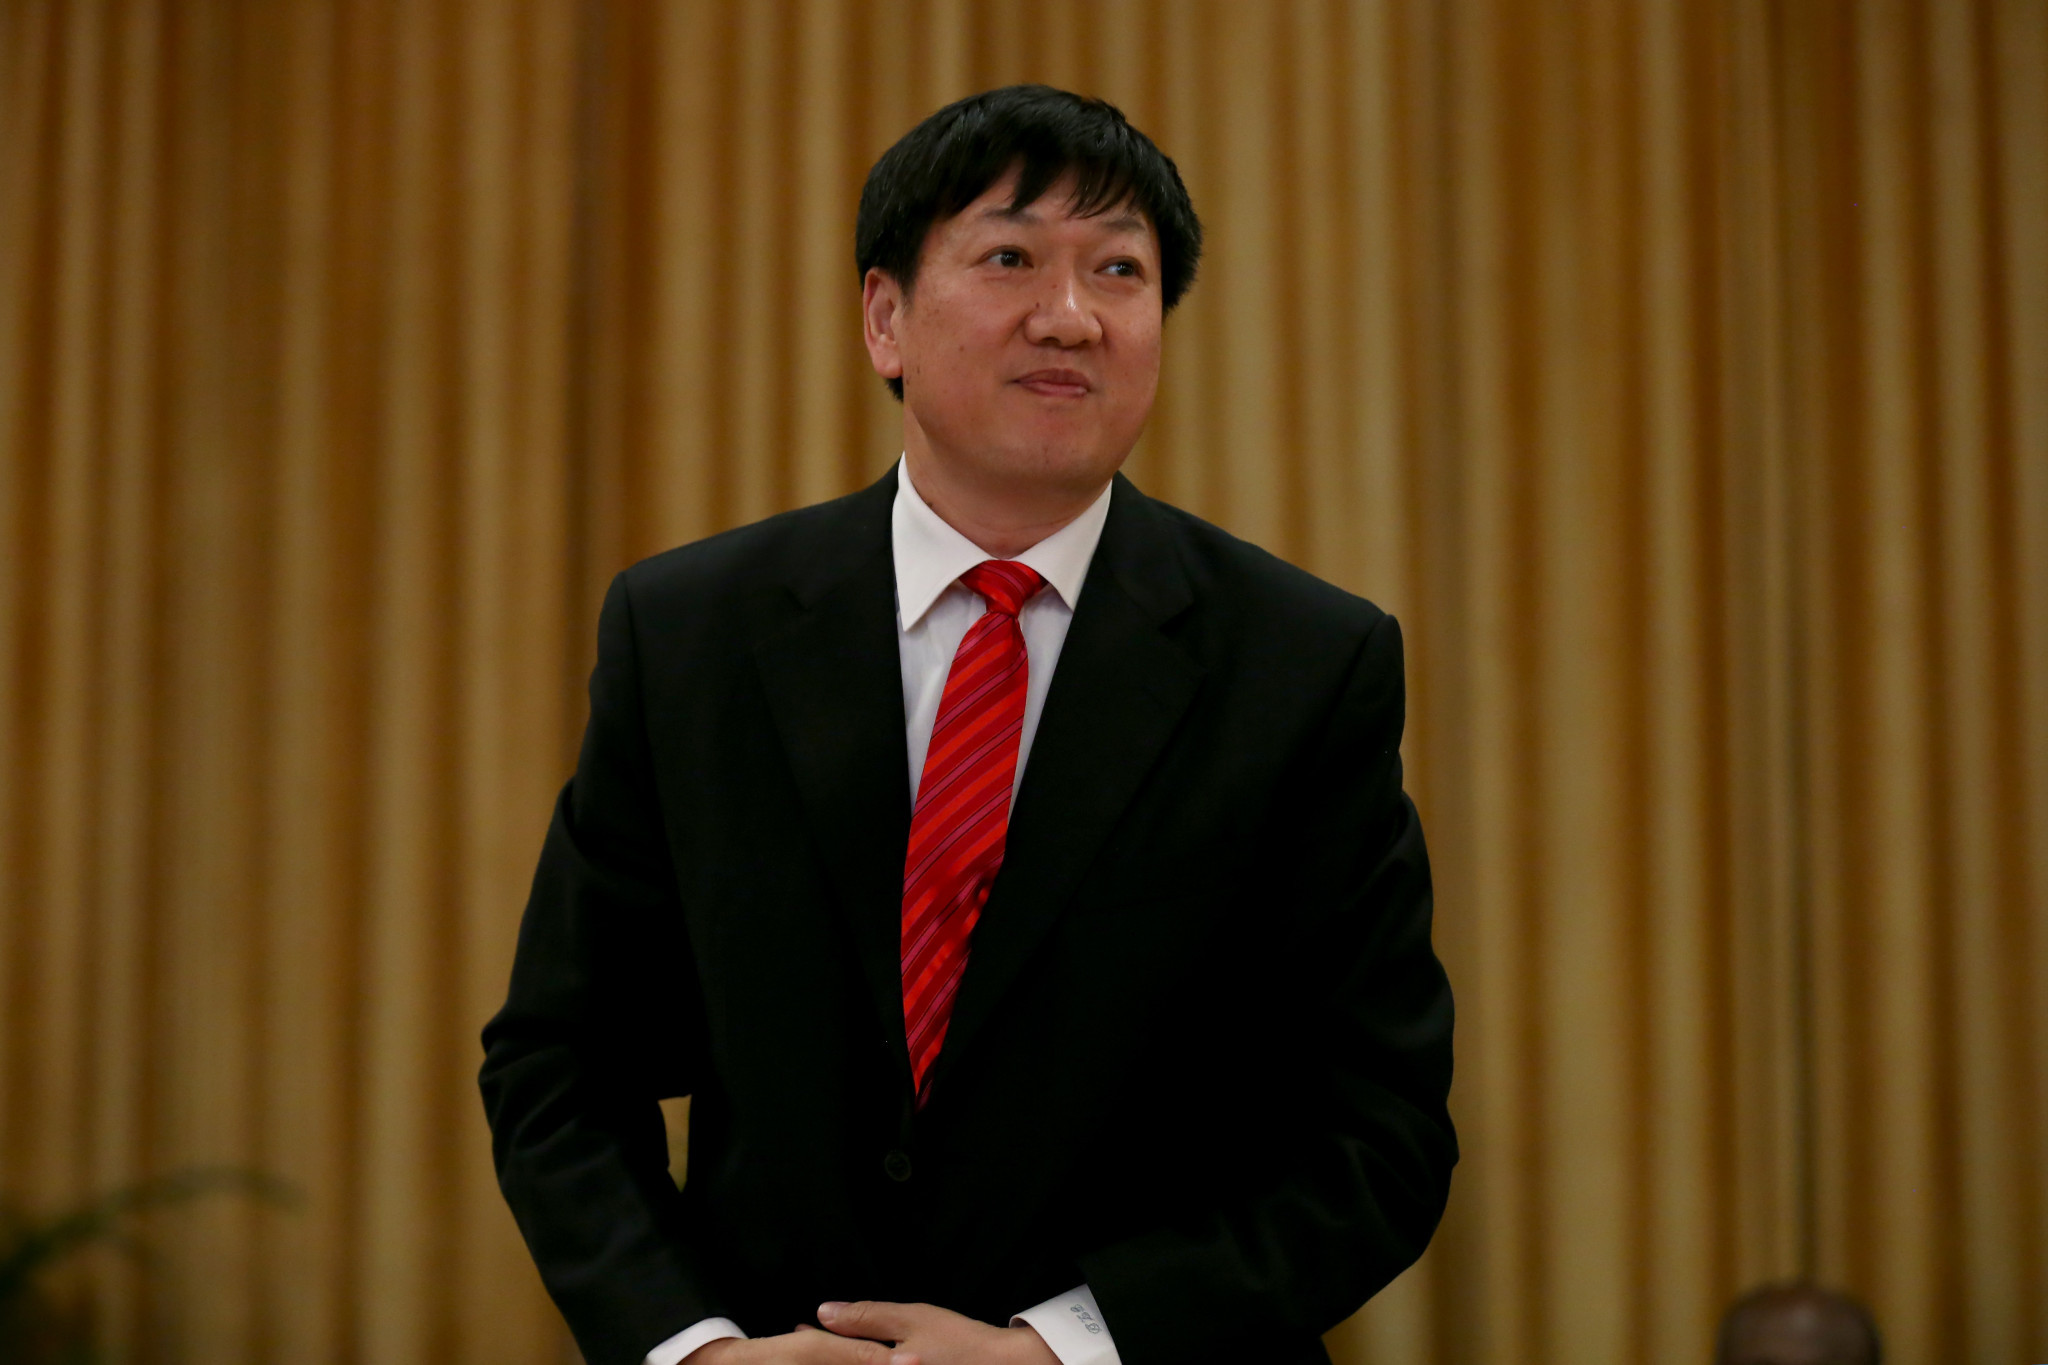 Zhidan elected as new President of Chinese Olympic Committee